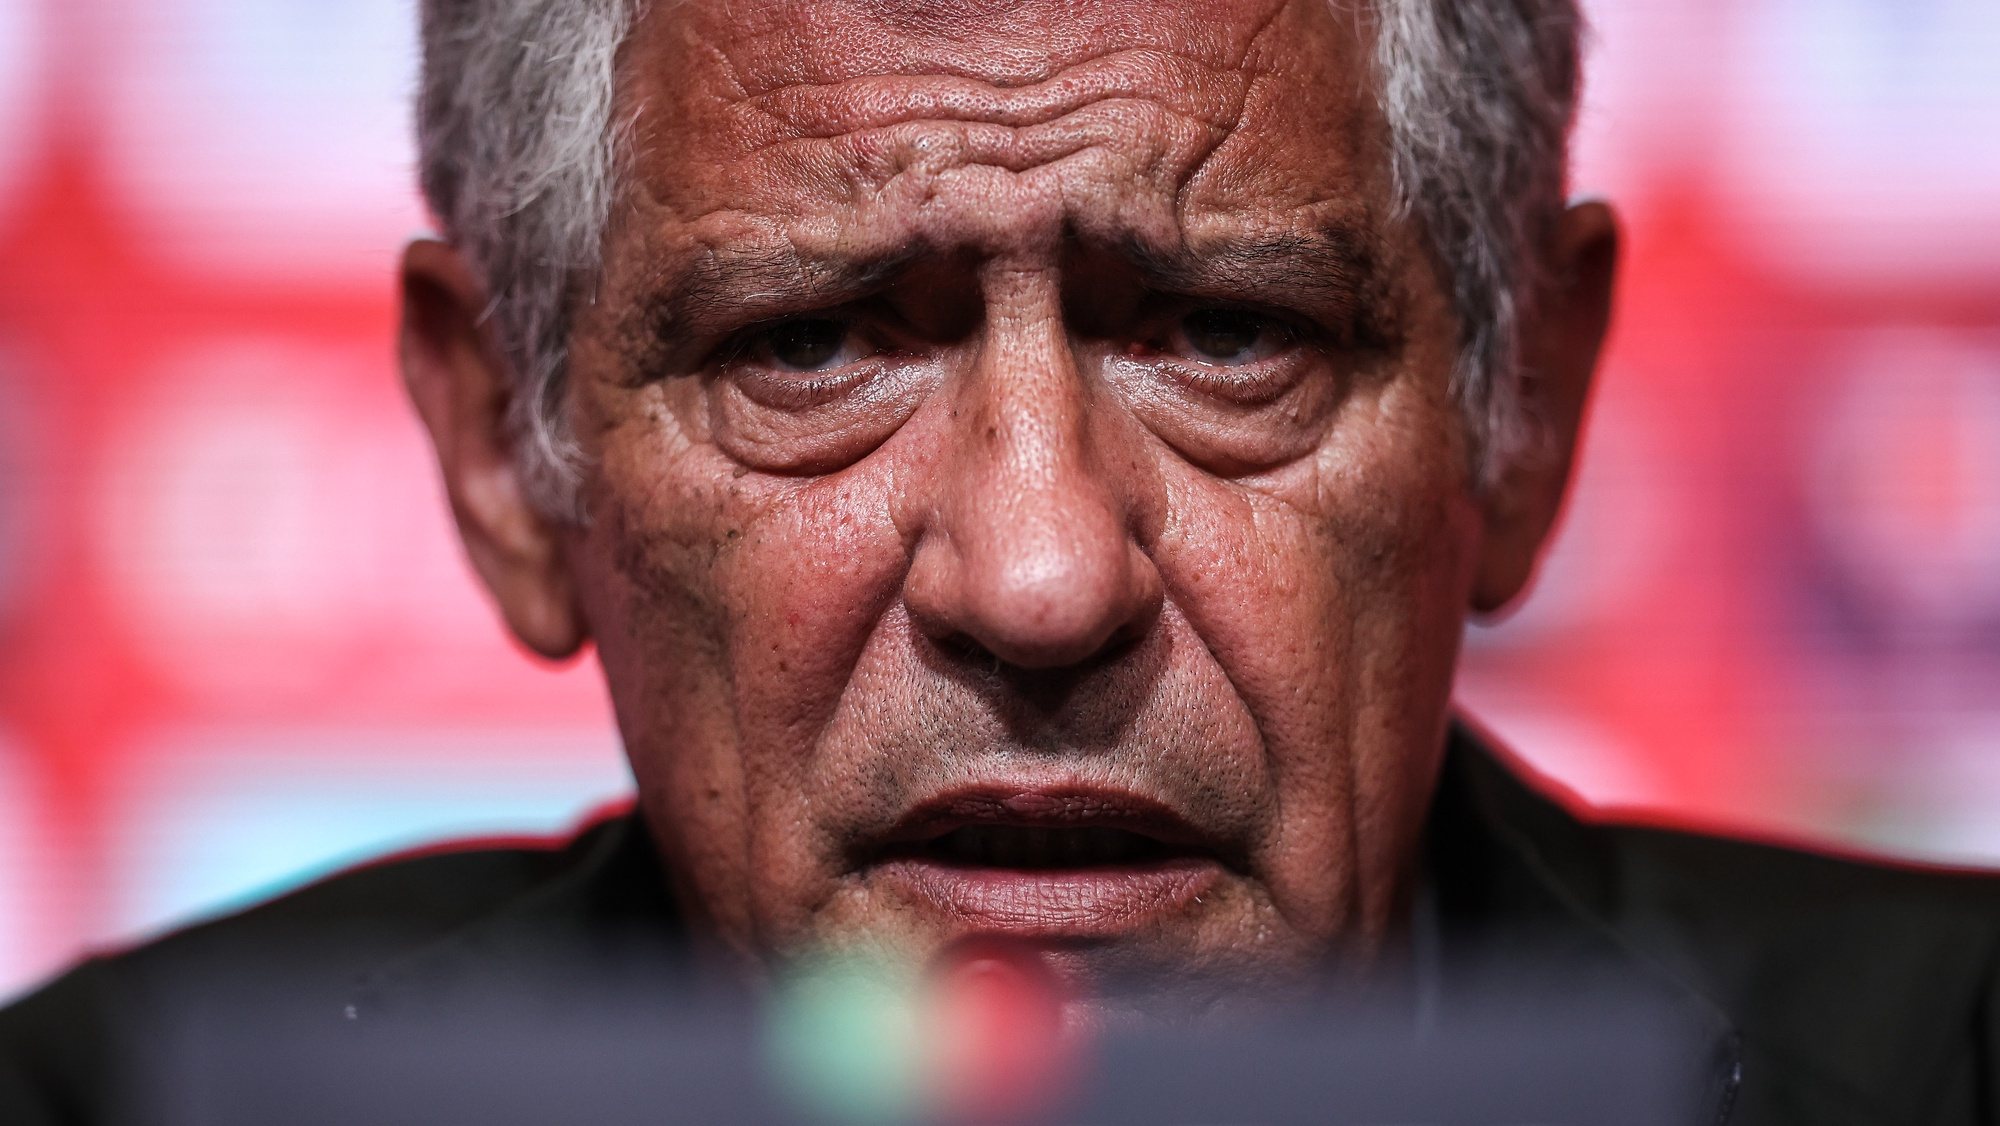 Portugal soccer team head coach Fernando Santos attends a press conference at Cidade do Futebol in Oeiras, outskirts of Lisbon, Portugal, 11 June 2022. Portugal will play against the Switzerland on June 12th for the upcoming UEFA Nations League. RODRIGO ANTUNES/LUSA